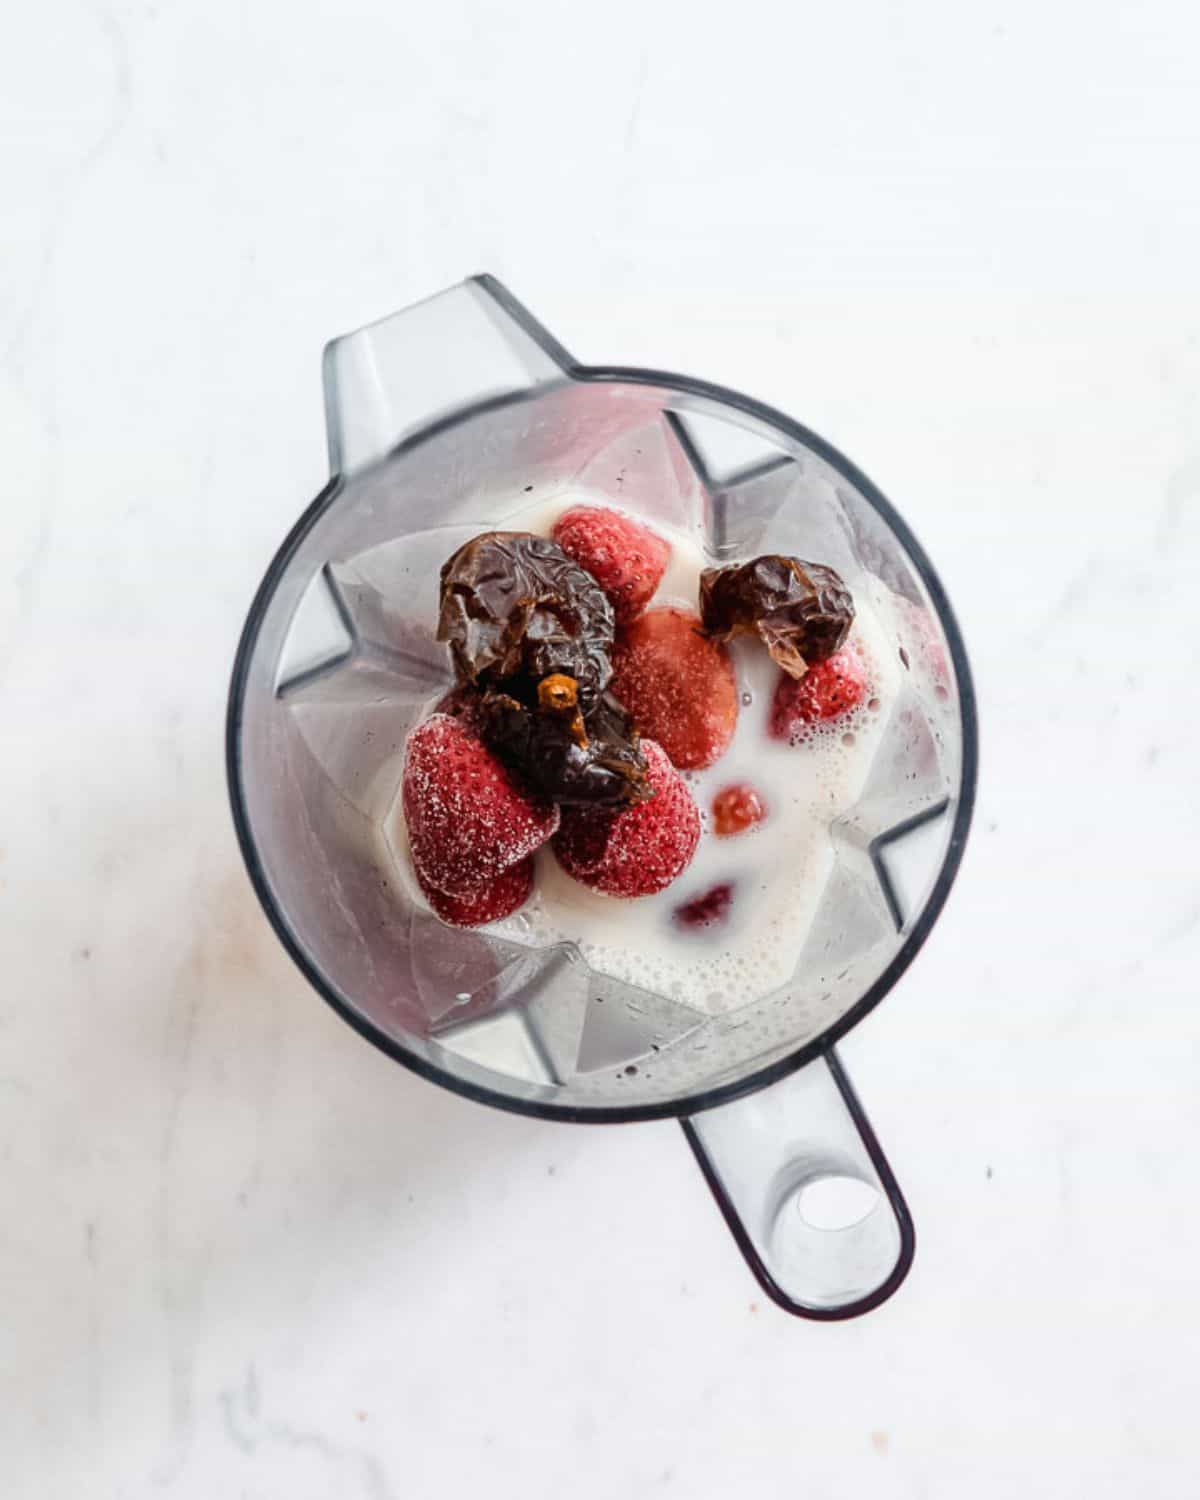 frozen strawberries, medjool dates and plant milk in a blender.